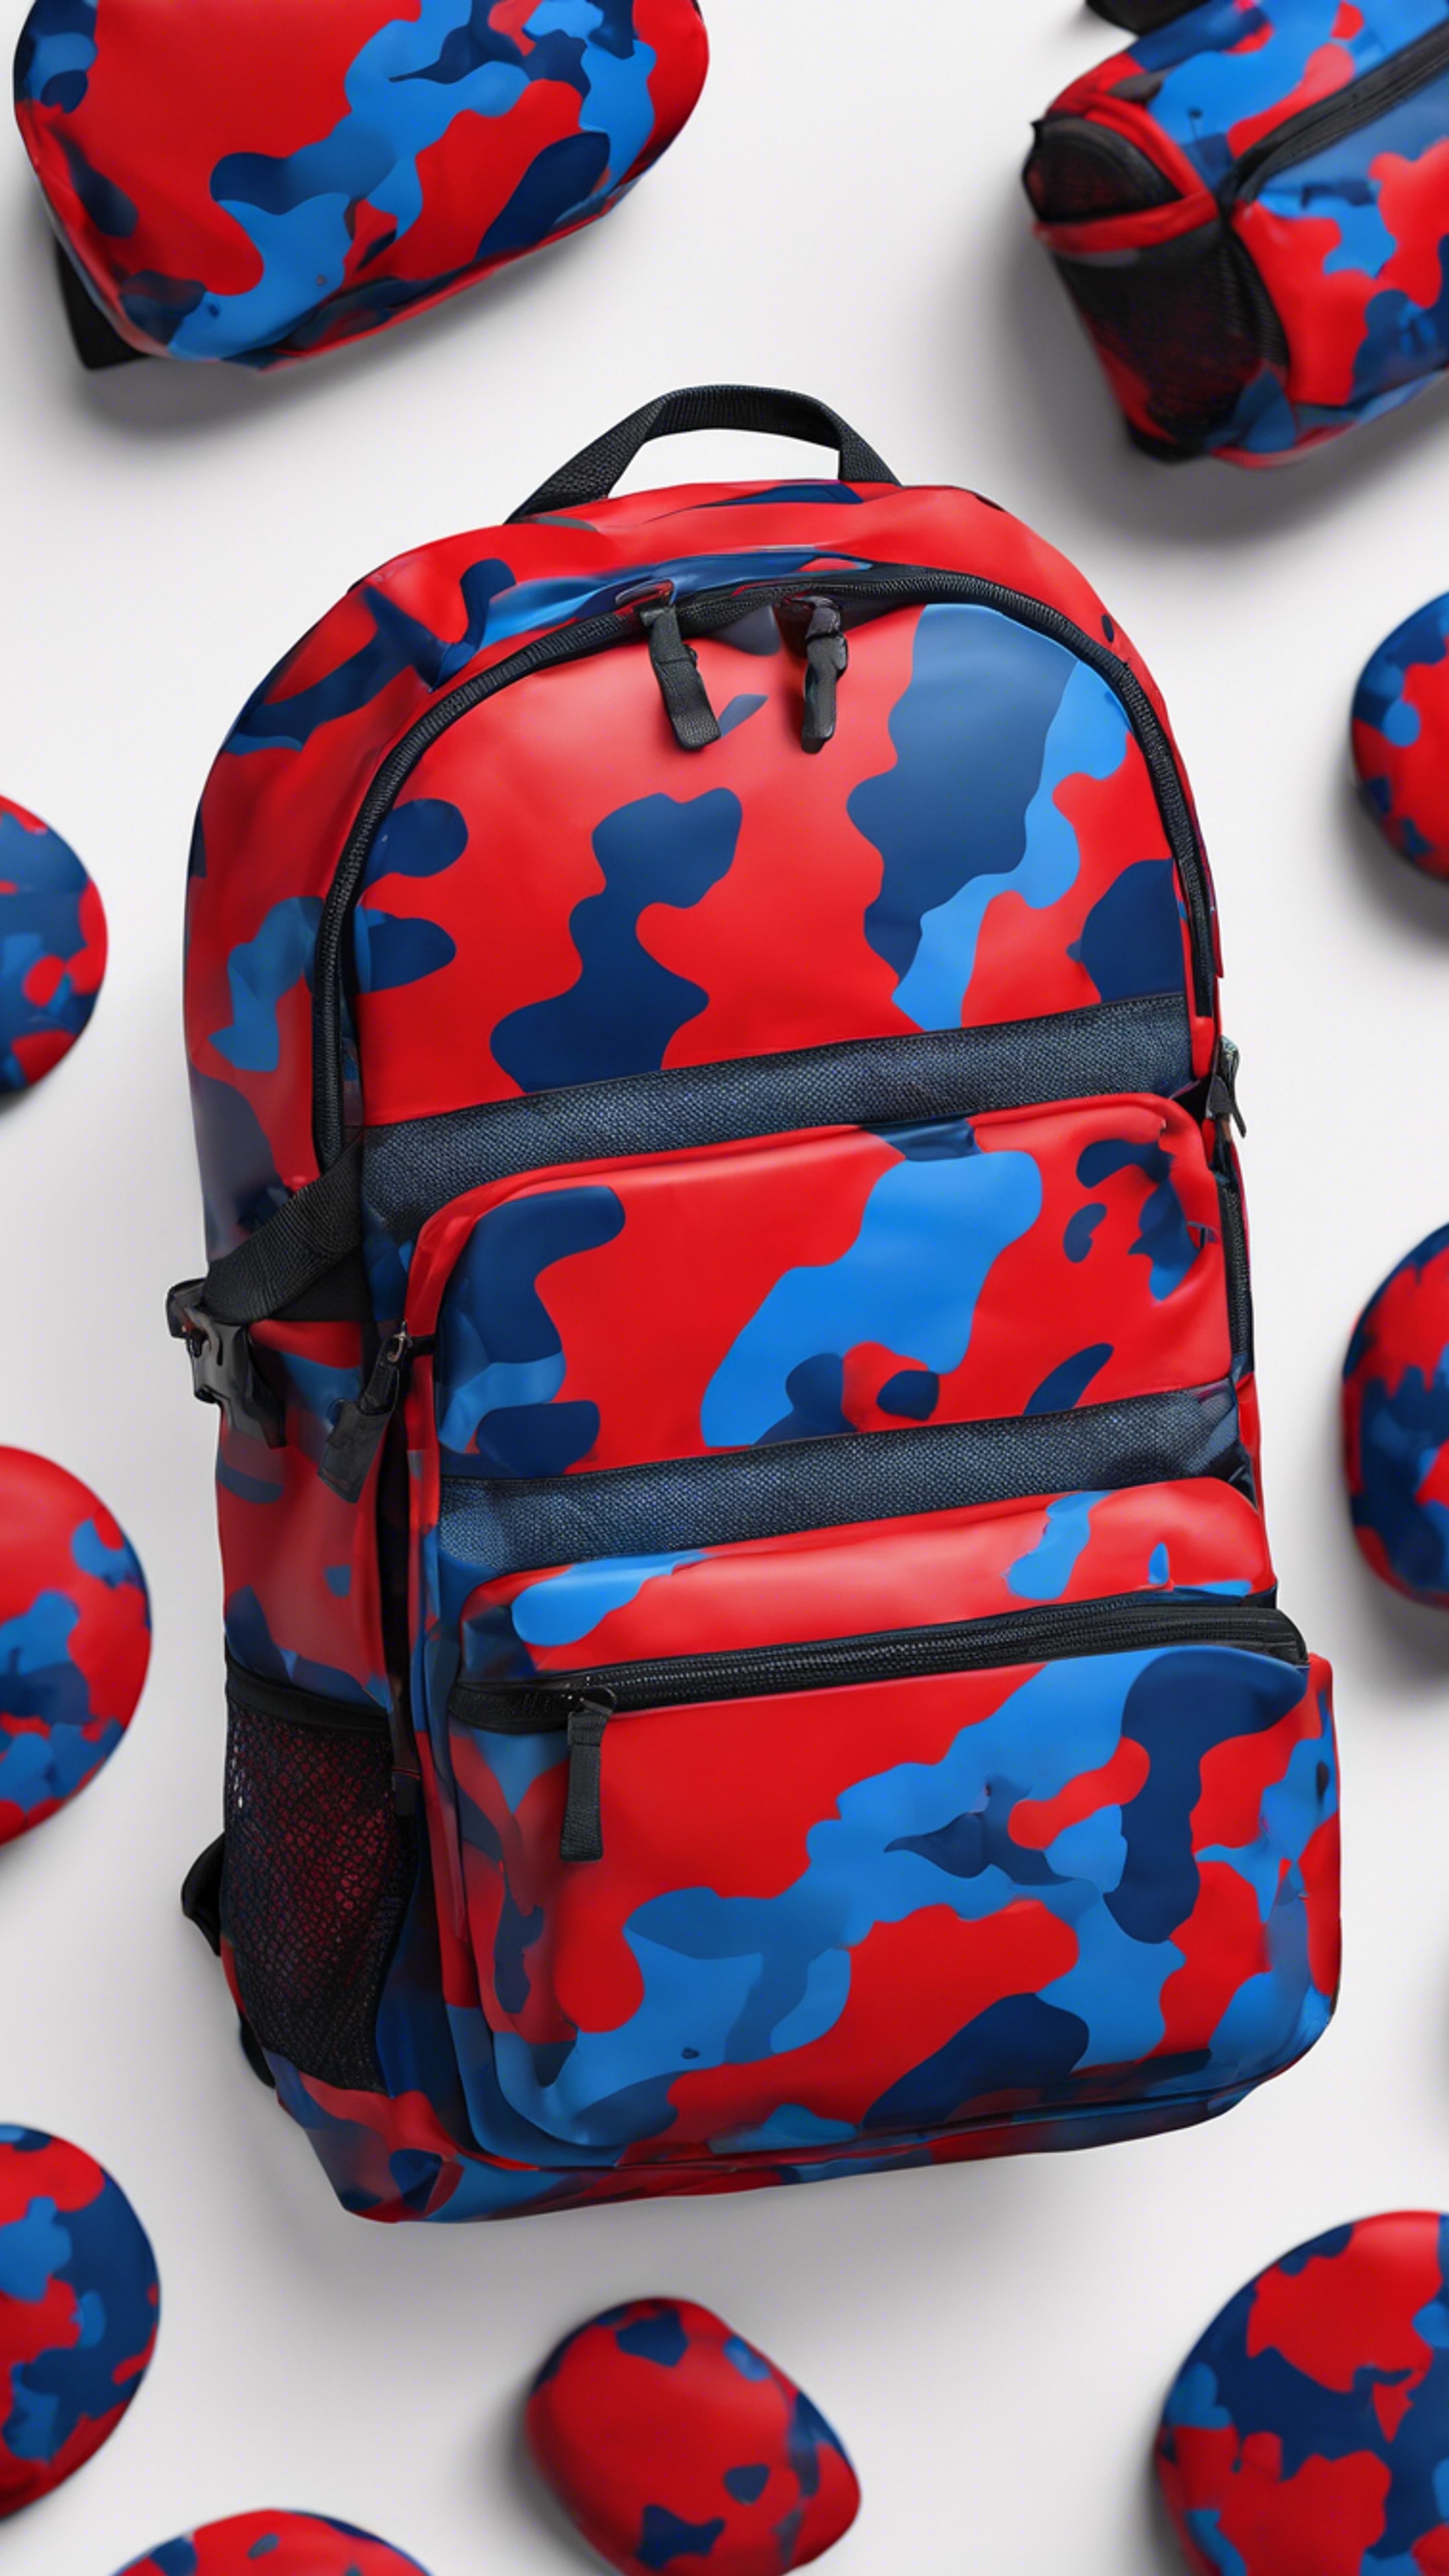 A seamless pattern of red and blue camouflage like on a sports backpack. Wallpaper[ebf2c58b20f943e08eab]